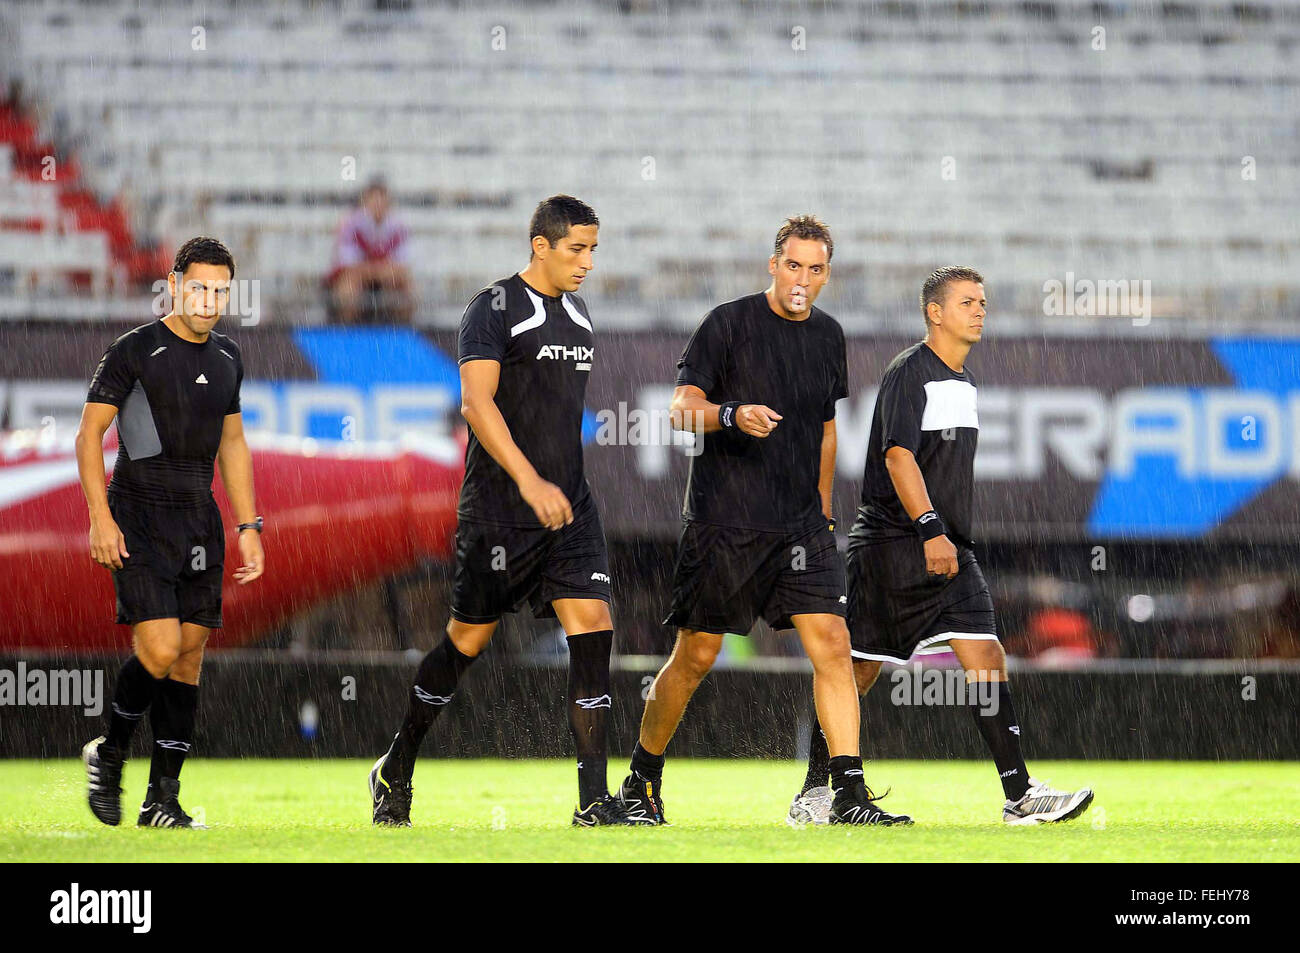 Buenos Aires, Argentina. 7th Feb, 2016. Referee Fernando Rapallini and his colleagues leave the field after stopping the match of the Tournament First Division between River Plate and Quilmes, held at the Antonio Vespuci Monumental Stadium, in the city of Buenos Aires, capital of Argentina, on Feb. 7, 2016. A heavy rain forced the suspension of the match, and it was rescheduled. © Maximiliano Luna/TELAM/Xinhua/Alamy Live News Stock Photo